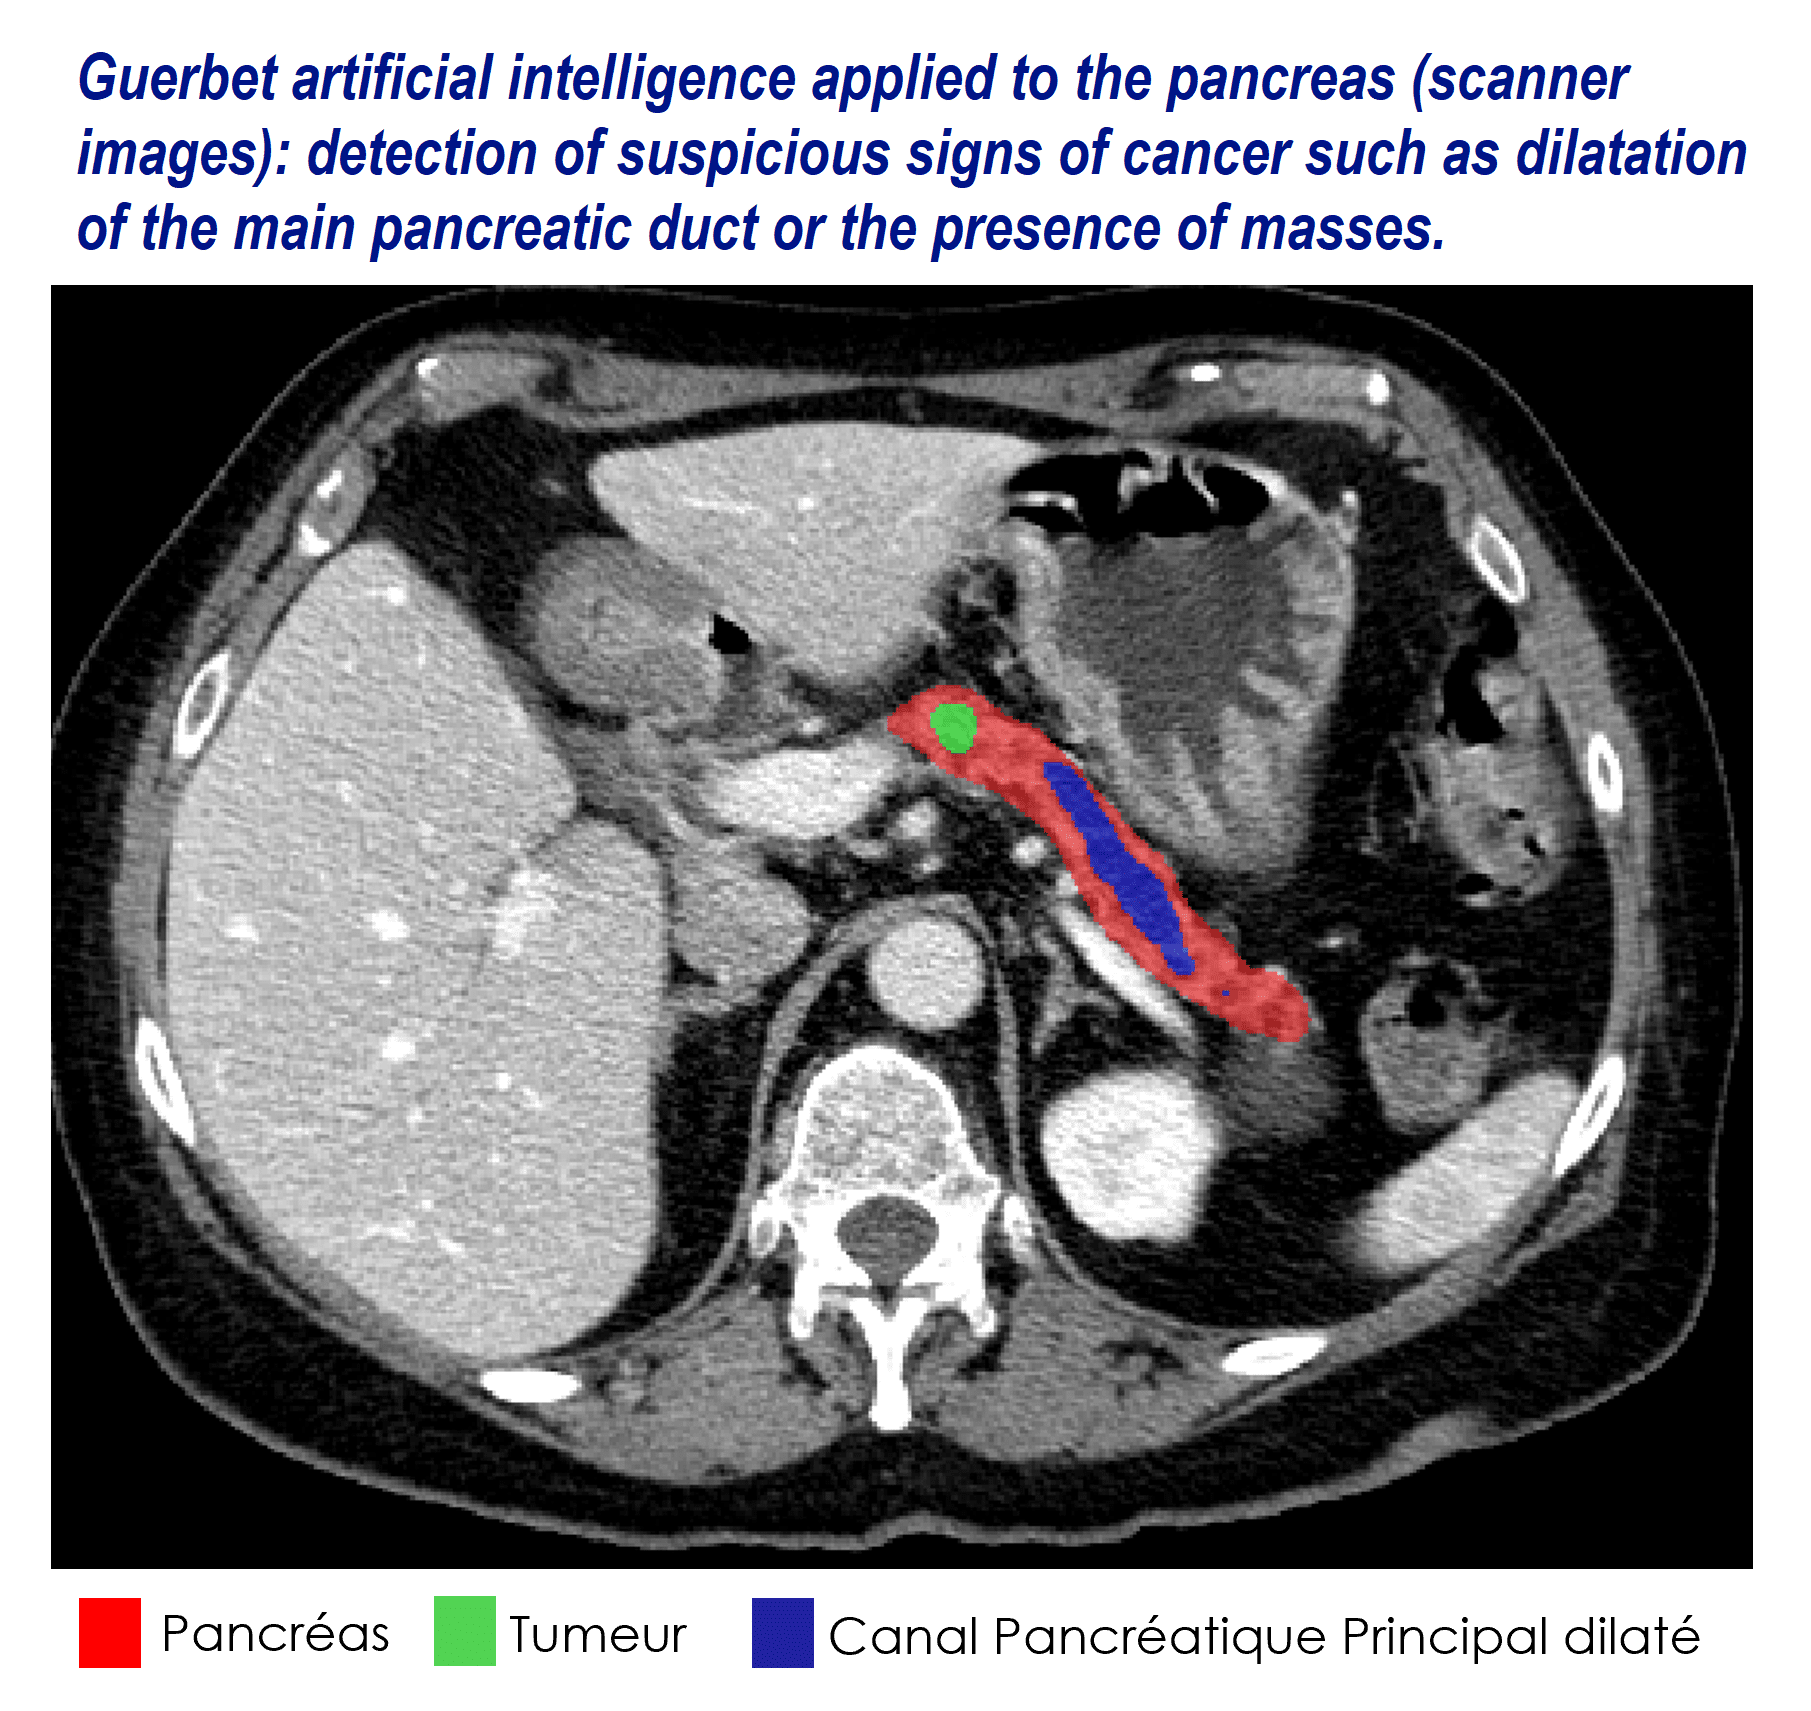 Guerbet artificial intelligence applied to the pancreas (scanner images): detection of suspicious signs of cancer such as dilatation of the main pancreatic duct or the presence of masses.